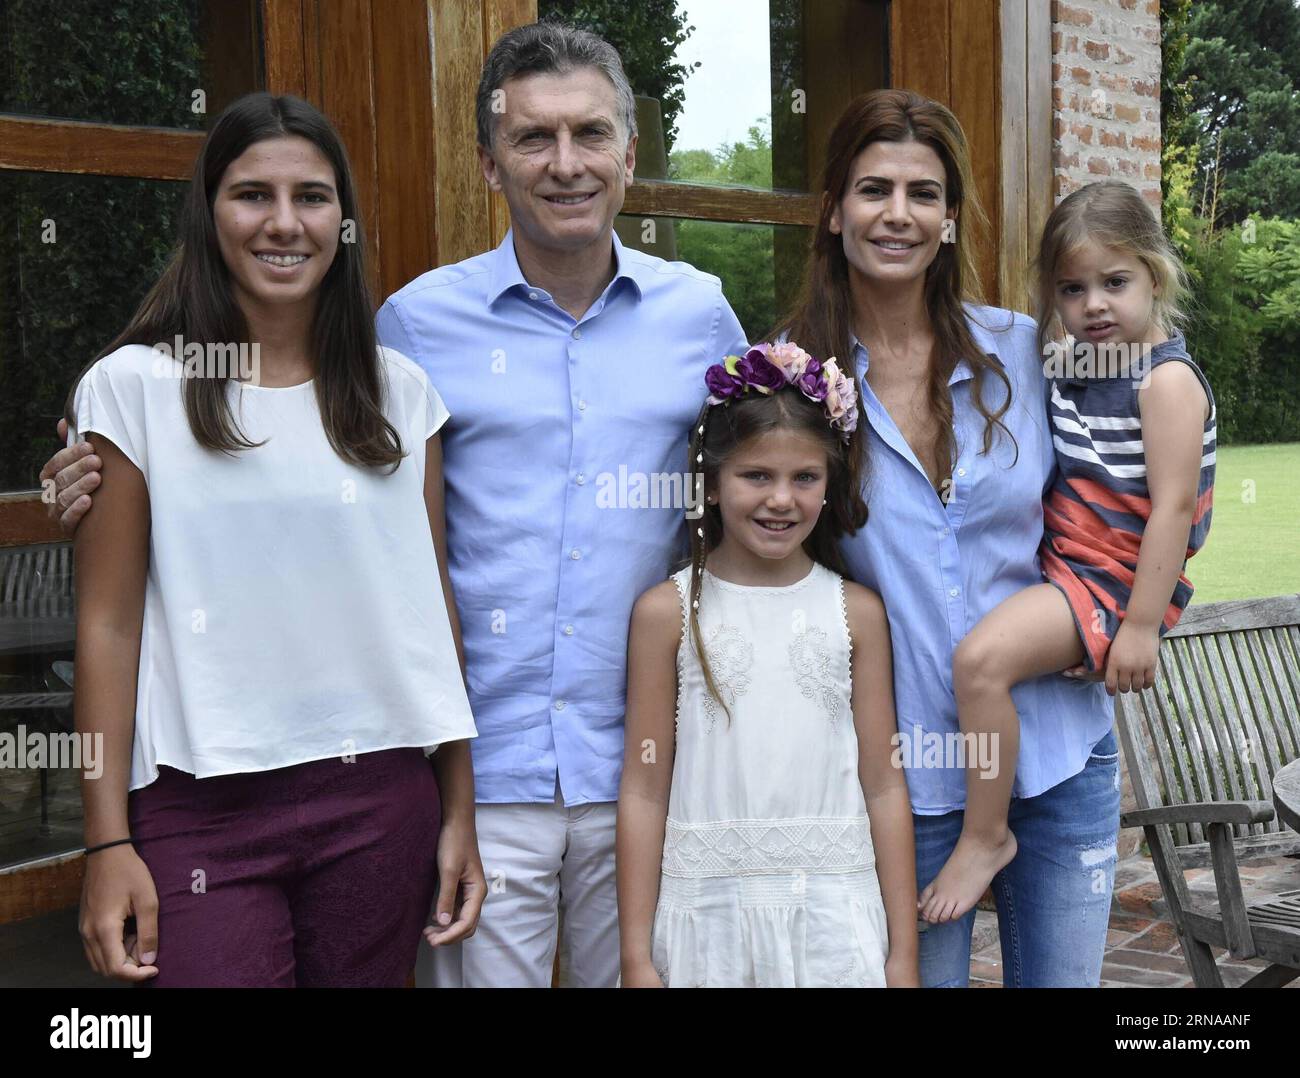 Argentina s President Mauricio Macri (2nd L), accompanied by First Lady Juliana Awada (2nd R) and their daughter Antonia (1st R), poses with Iara (1st L) and Kala Nisman (3rd R), daughters of late prosecutor Alberto Nisman, at his particular residence of Los Abrojos , in Los Polvorines town, Buenos Aires Province, Argentina, on Jan. 17, 2016. According to local press, Muricio Macri received on Sunday Iara and Kala Nisman, daughters of Alberto Nisman who was found dead on Jan. 18, 2015 in his apartment in Puerto Madero for reasons still being investigated. Argentina s Presidency/TELAM) (jp) (ah Stock Photo